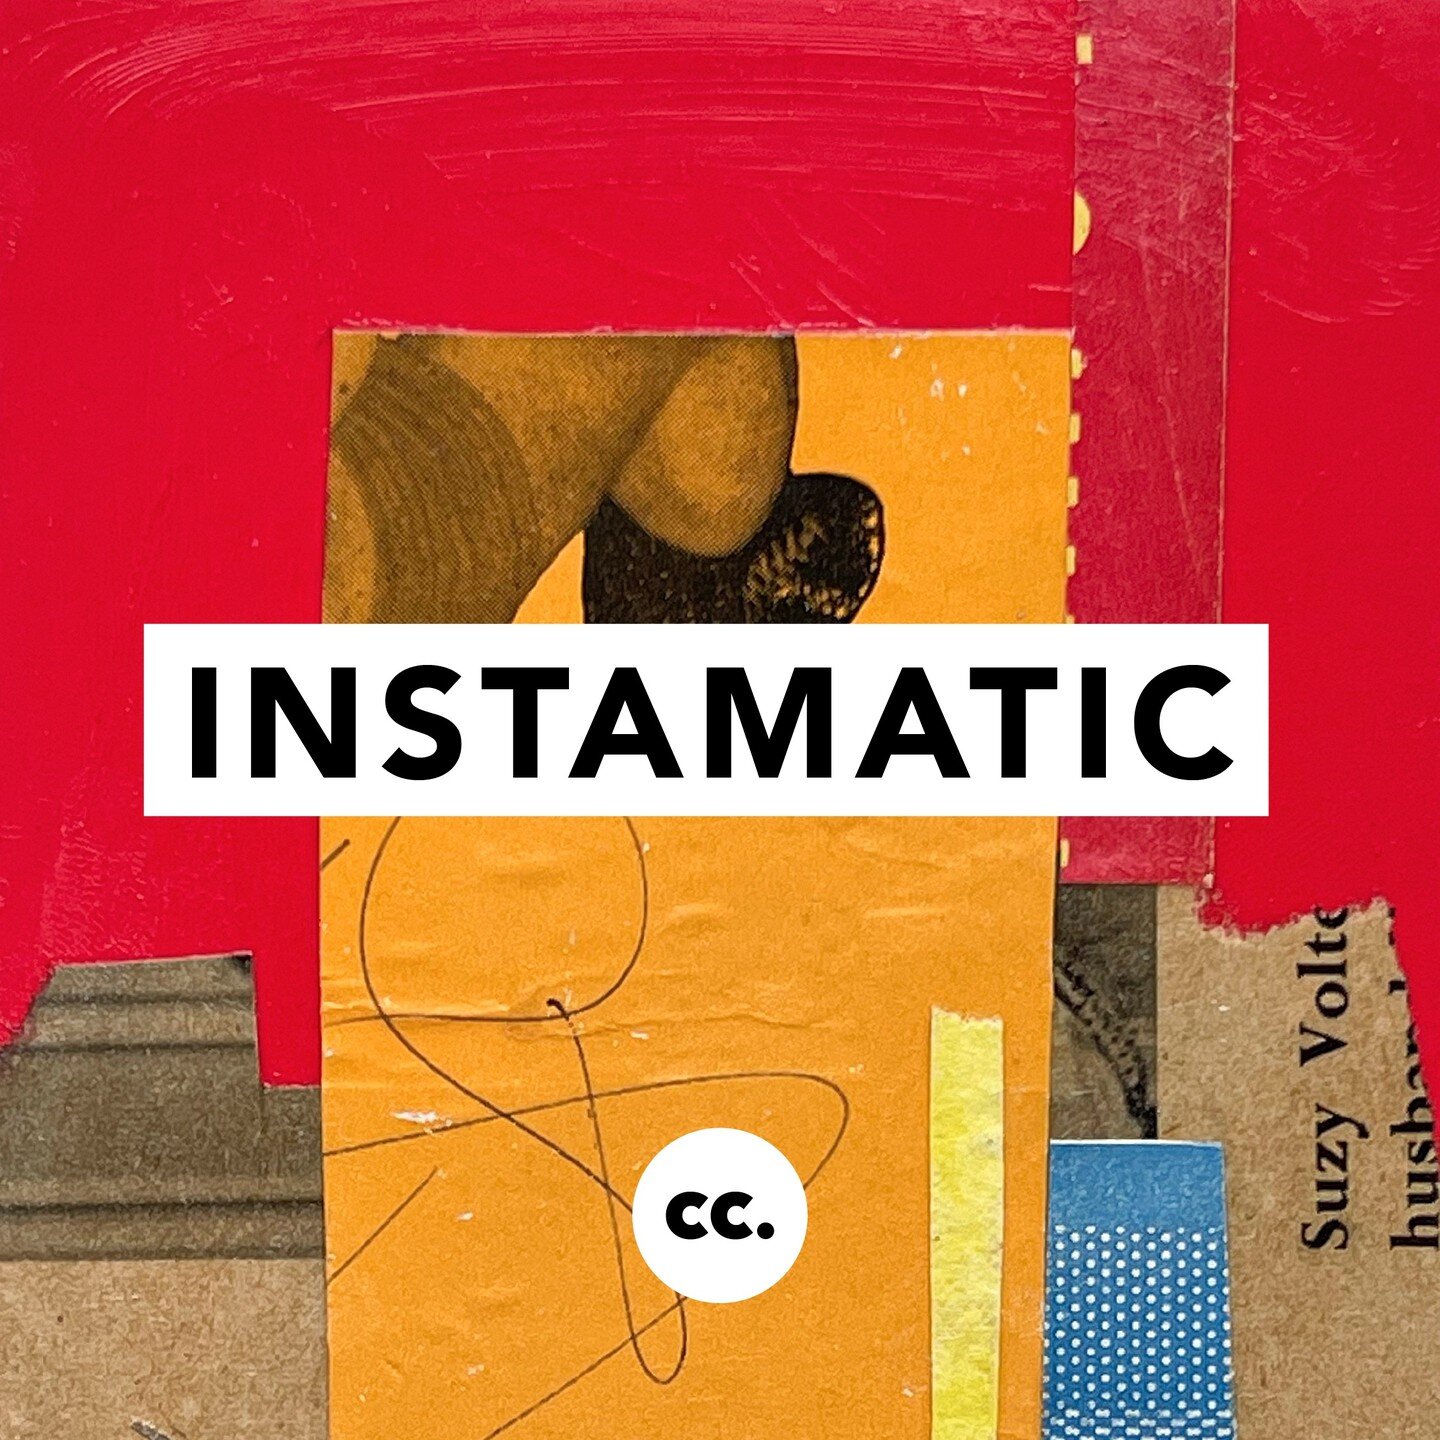 The Instamatic feature in CC. Magazine is one of our longest standing articles to date, initially introduced in Issue #3 we&rsquo;ve since received just shy of 100,000 hashtags, and featured 100's of artists.

We&rsquo;ve decided, as this is an Insta